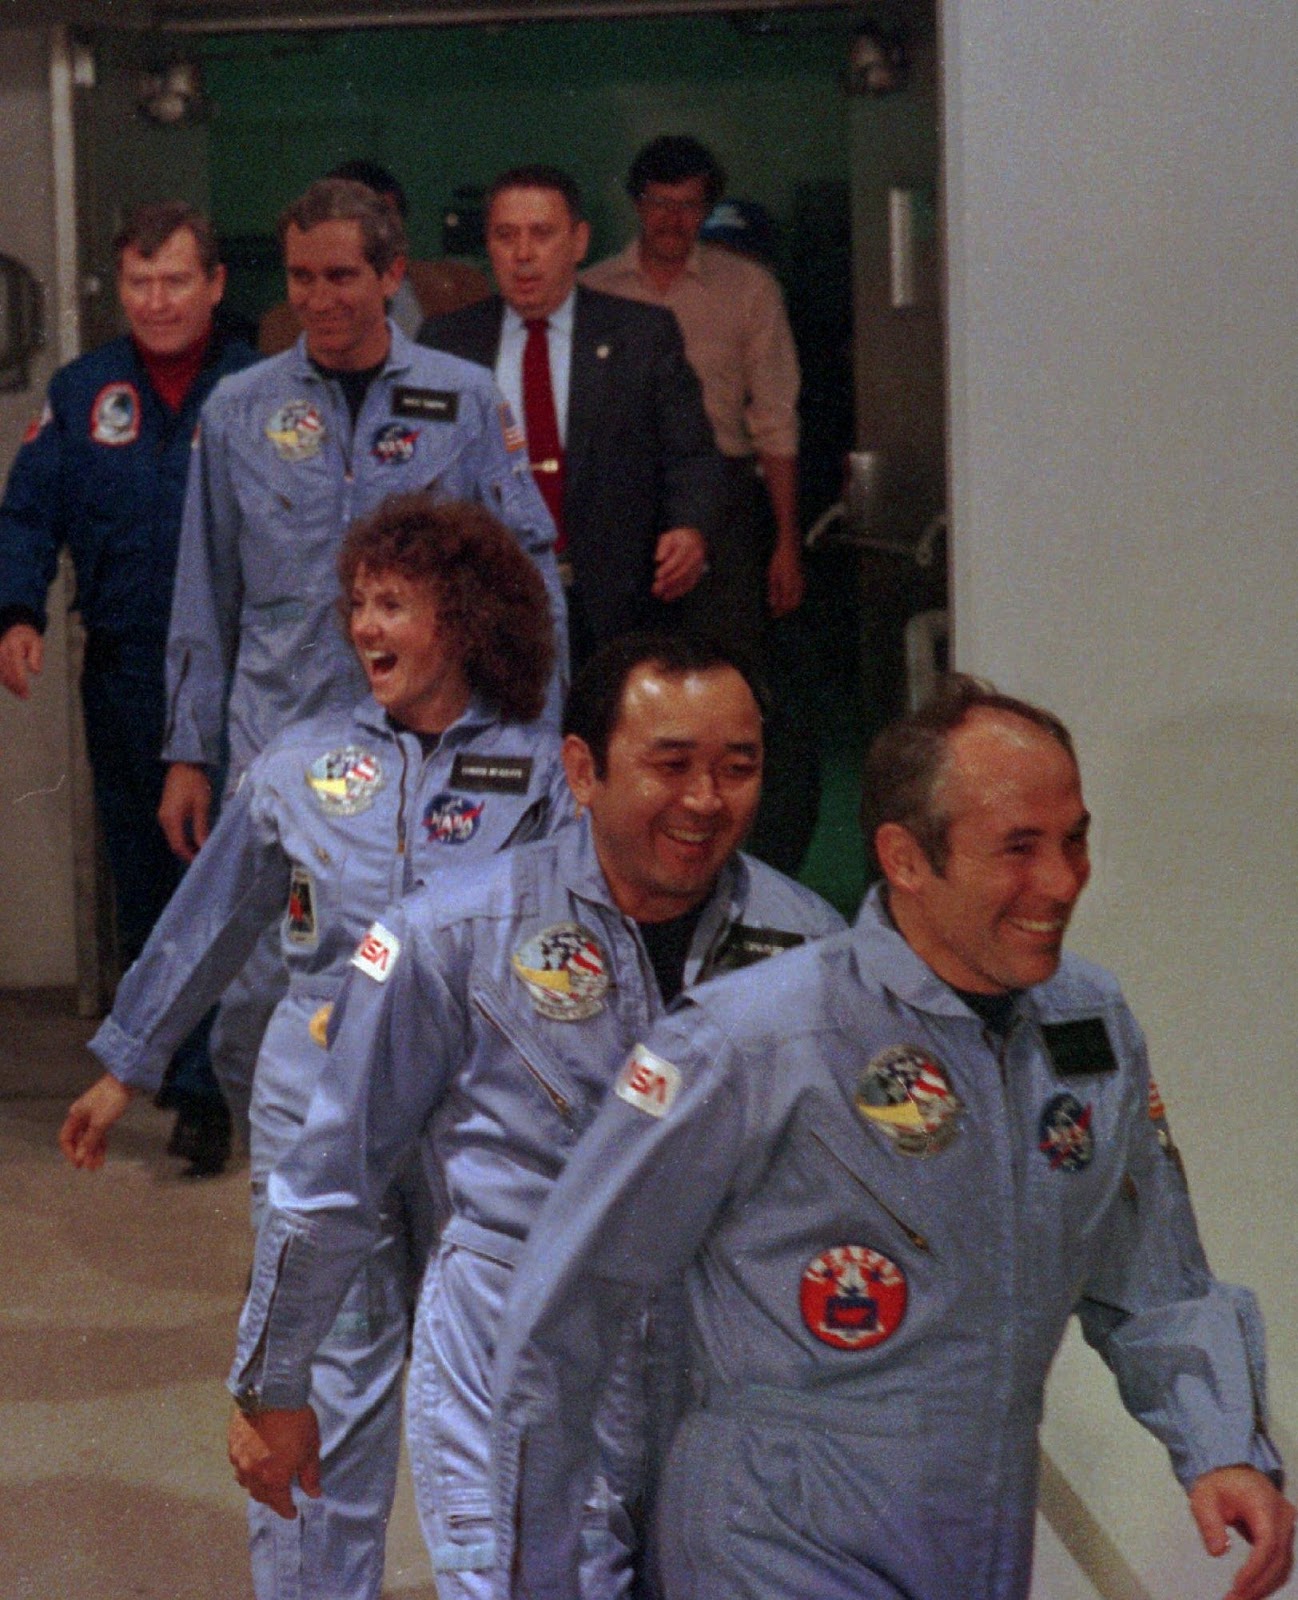 The Last Known Photo of the Space Shuttle Challenger Crew Boarding the Space Shuttle ...